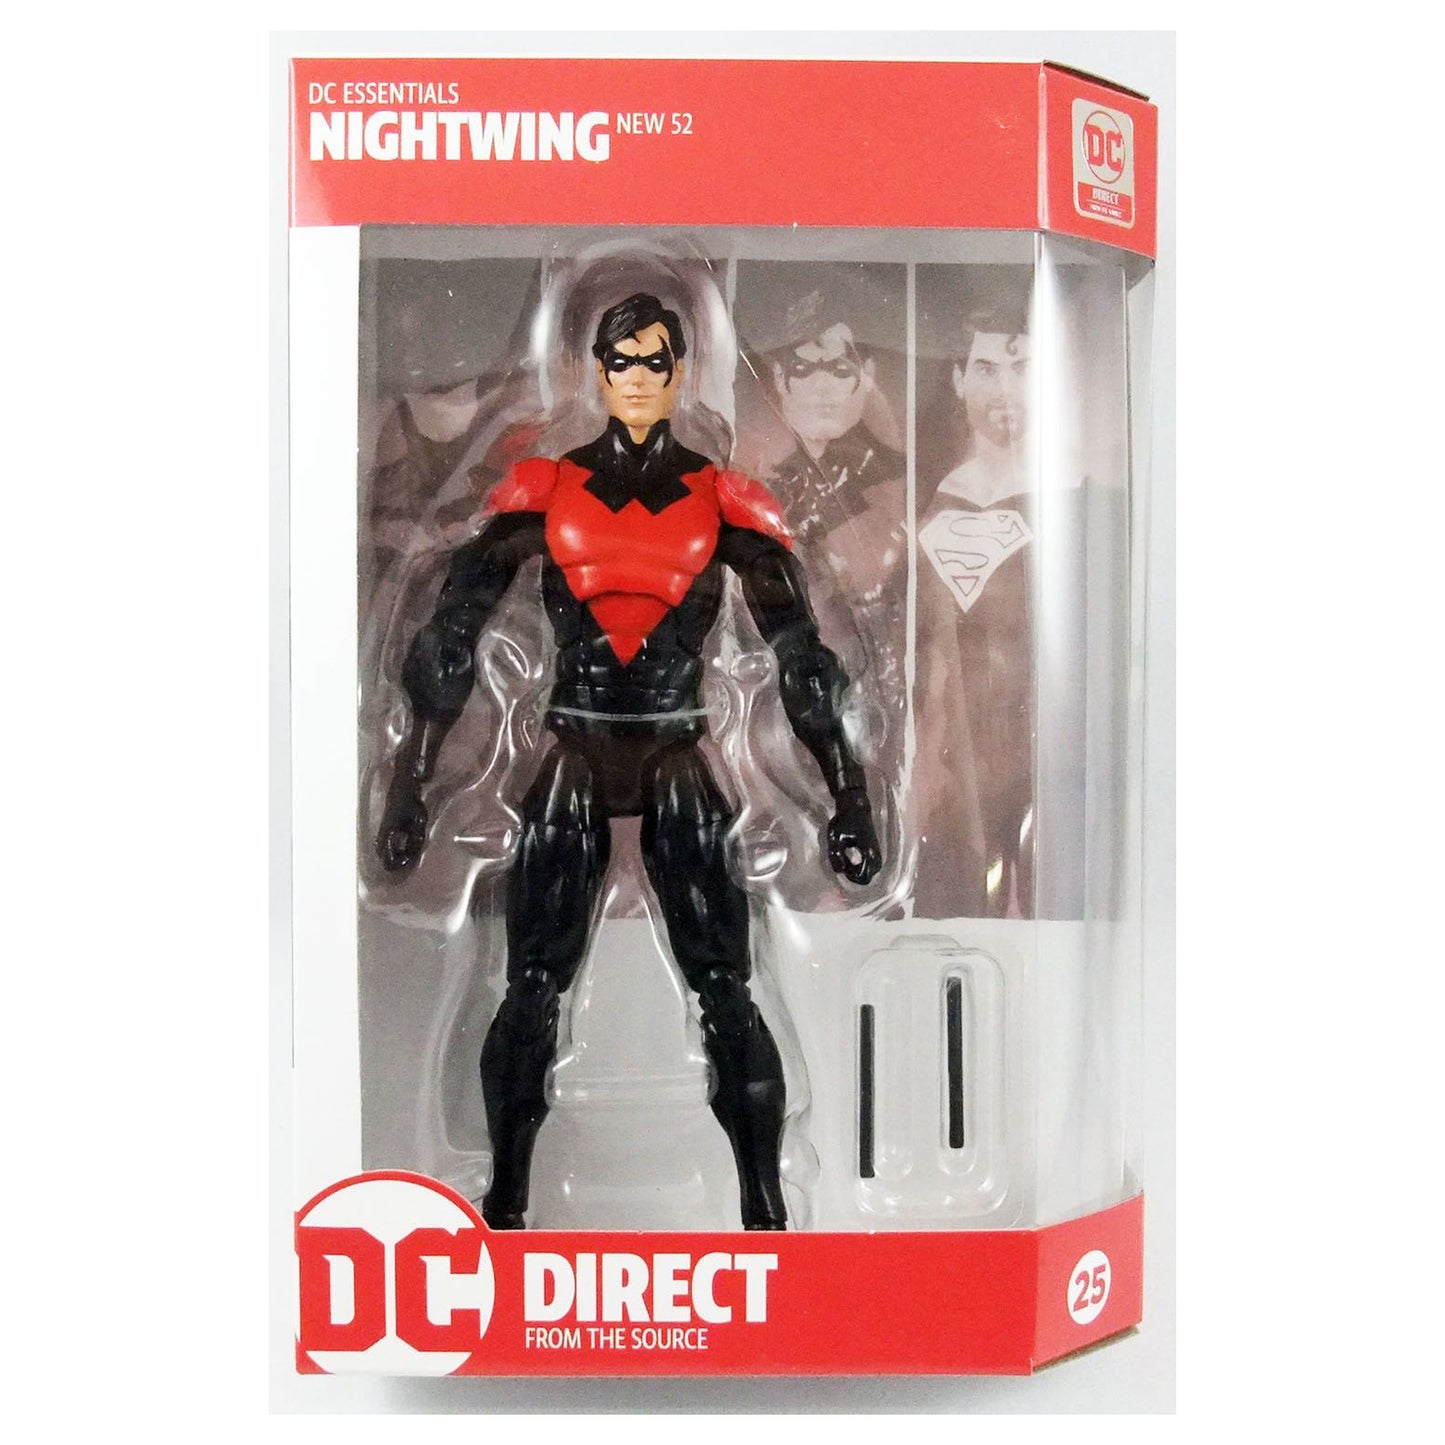 DC Direct DC Essentials Nightwing (New 52)